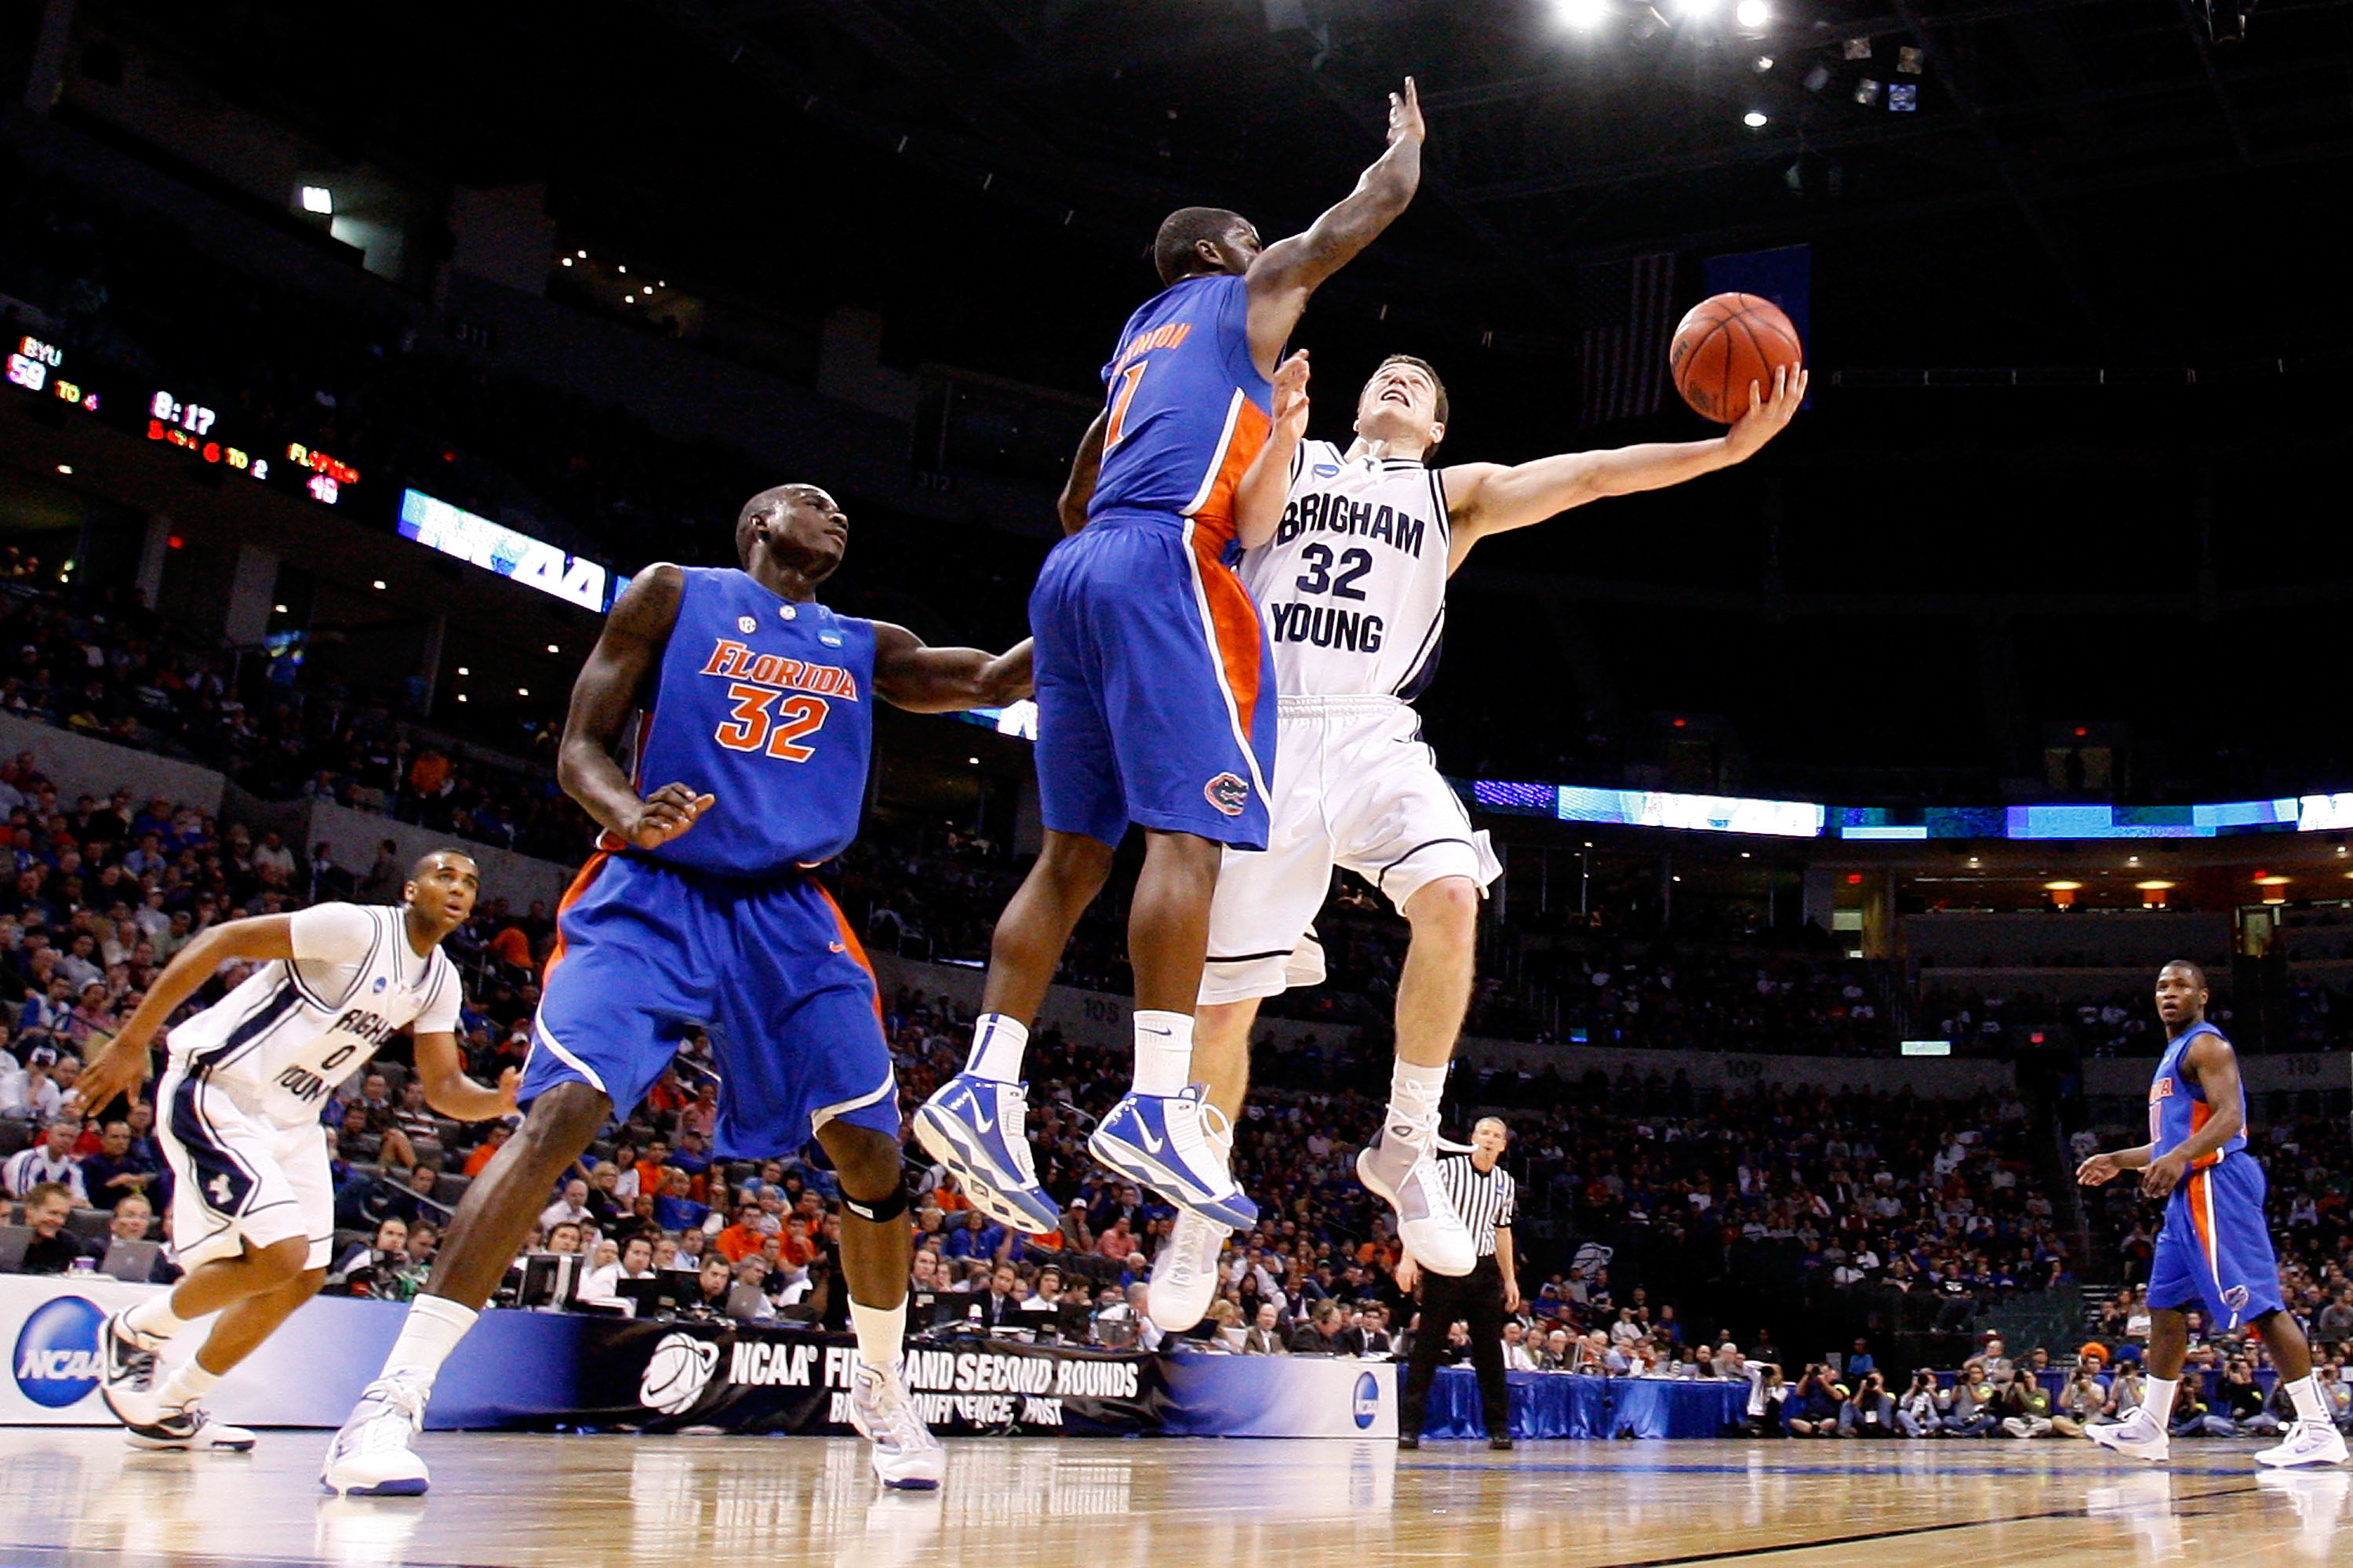 OKLAHOMA CITY - MARCH 18:  Jimmer Fredette #32 of the BYU Cougars drives for a shot attempt against Kenny Boynton #1 of the Florida Gators during the first round of the 2010 NCAA men�s basketball tournament at Ford Center on March 18, 2010 in Oklahoma Cit